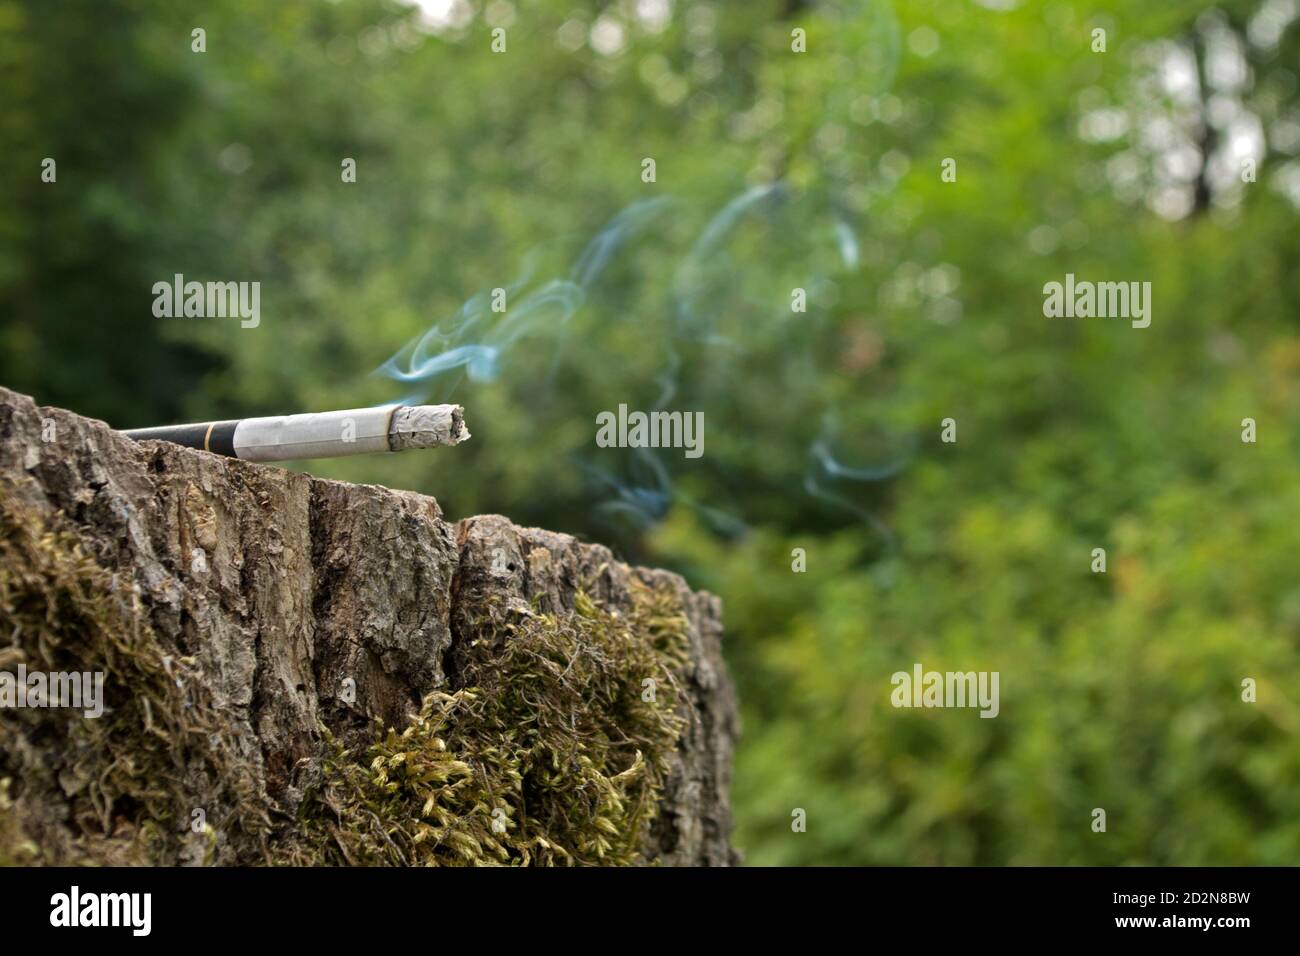 Smoking cigarette with column of ash, lying on mossy stump with gray bark, against green. Concept: Protect the environment from fire and garbage Stock Photo